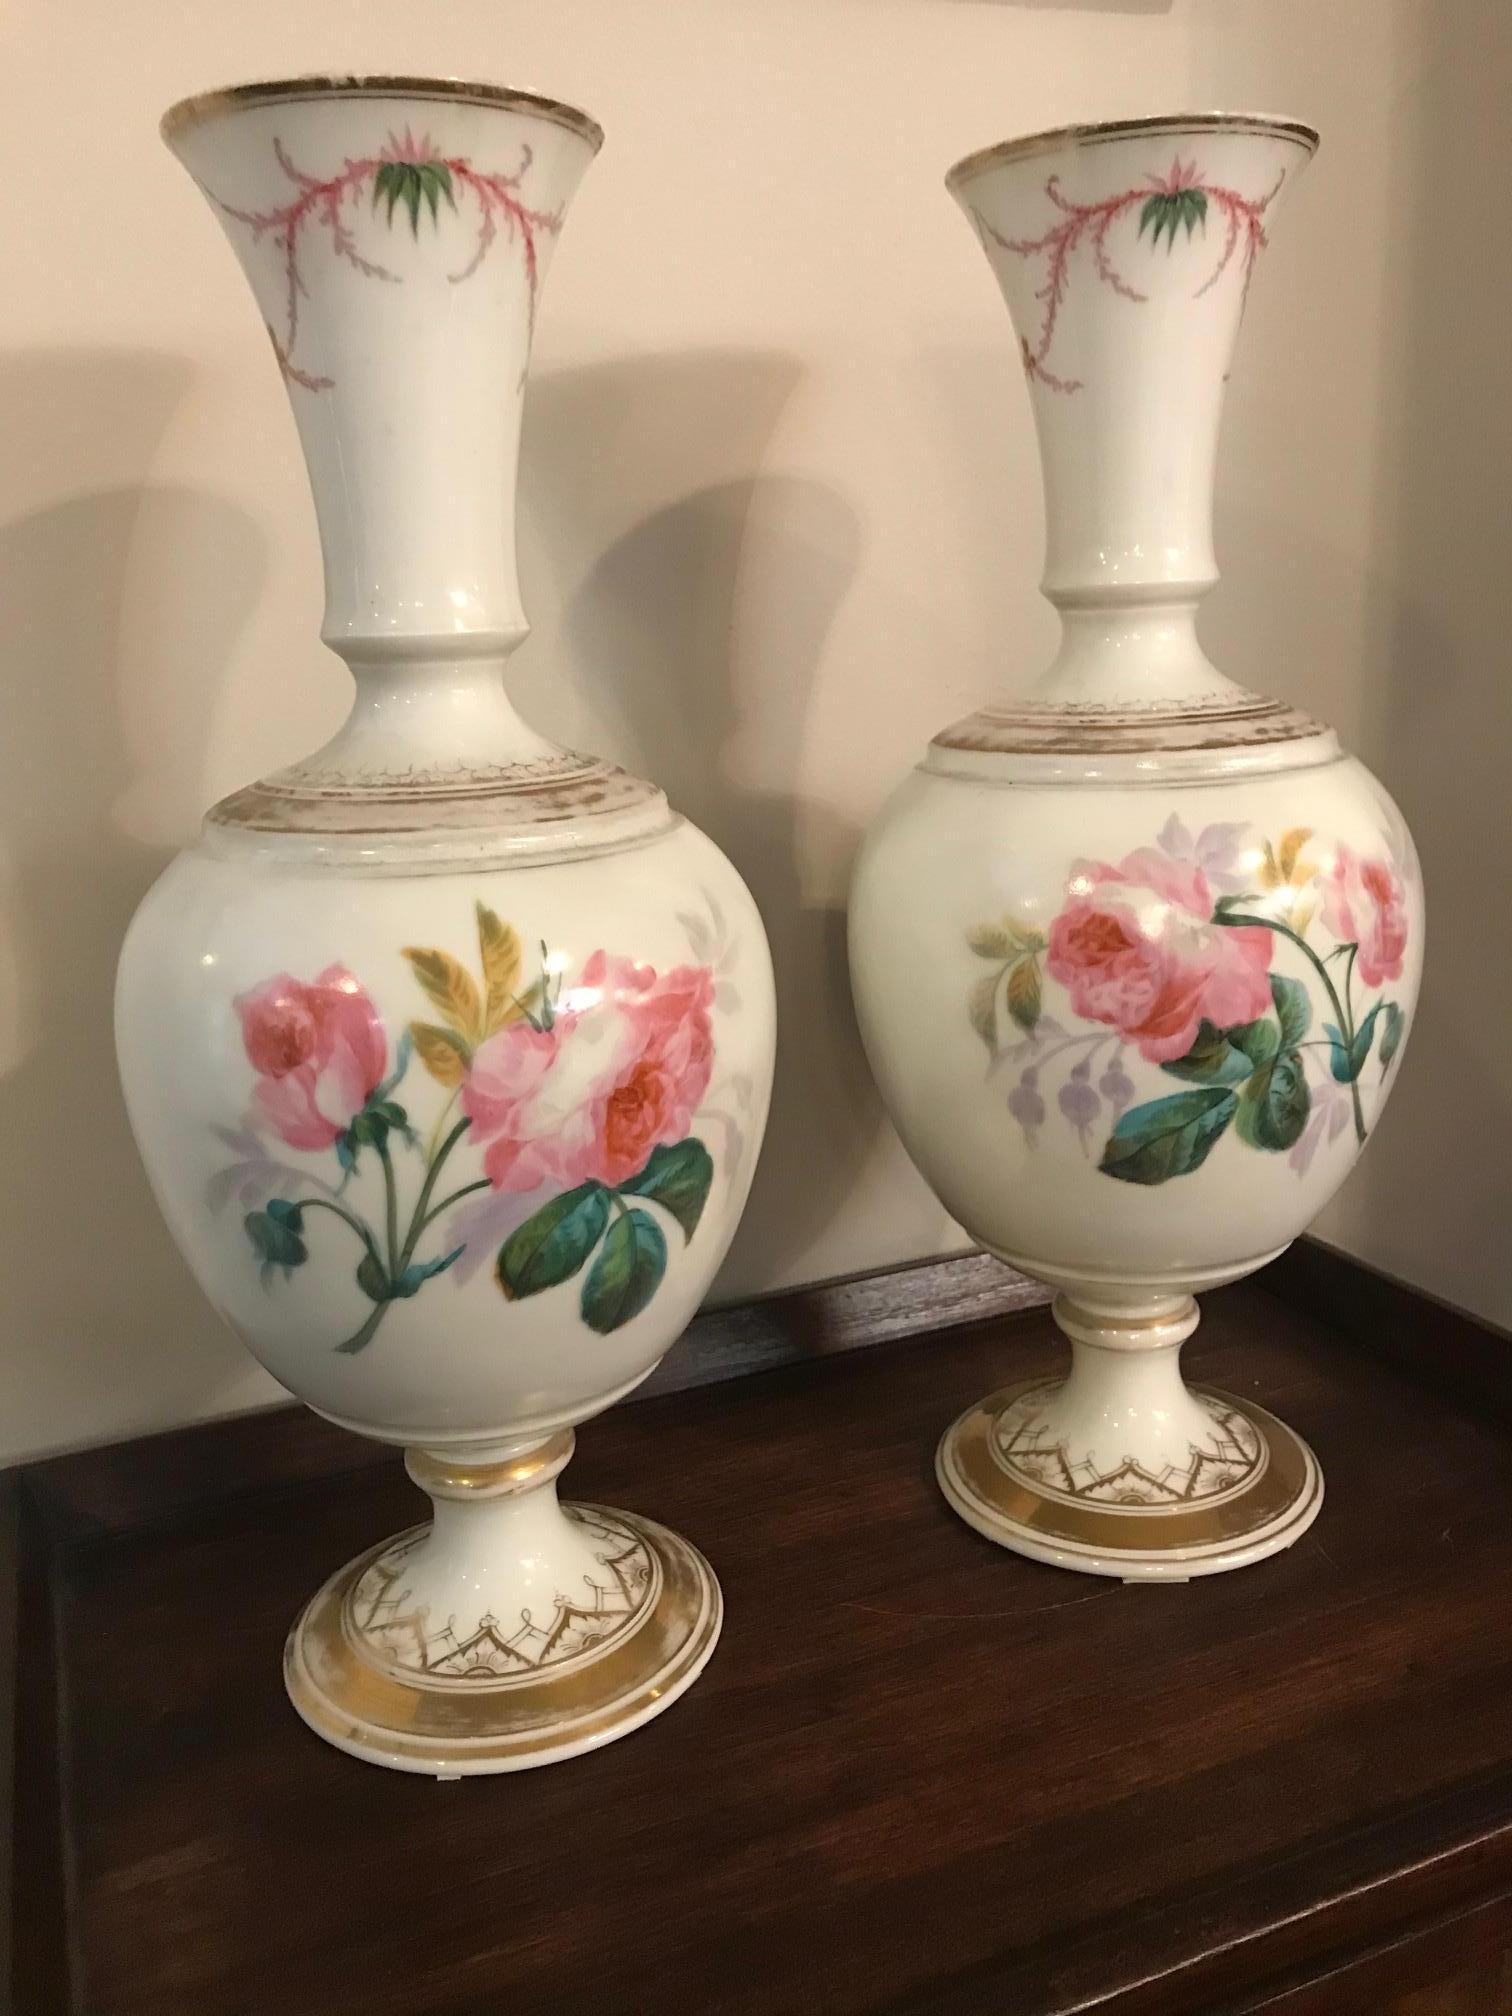 19th century French flowers decoration pair of vases from the 1850s.
Two different flowers decoration side. Gold decoration base.